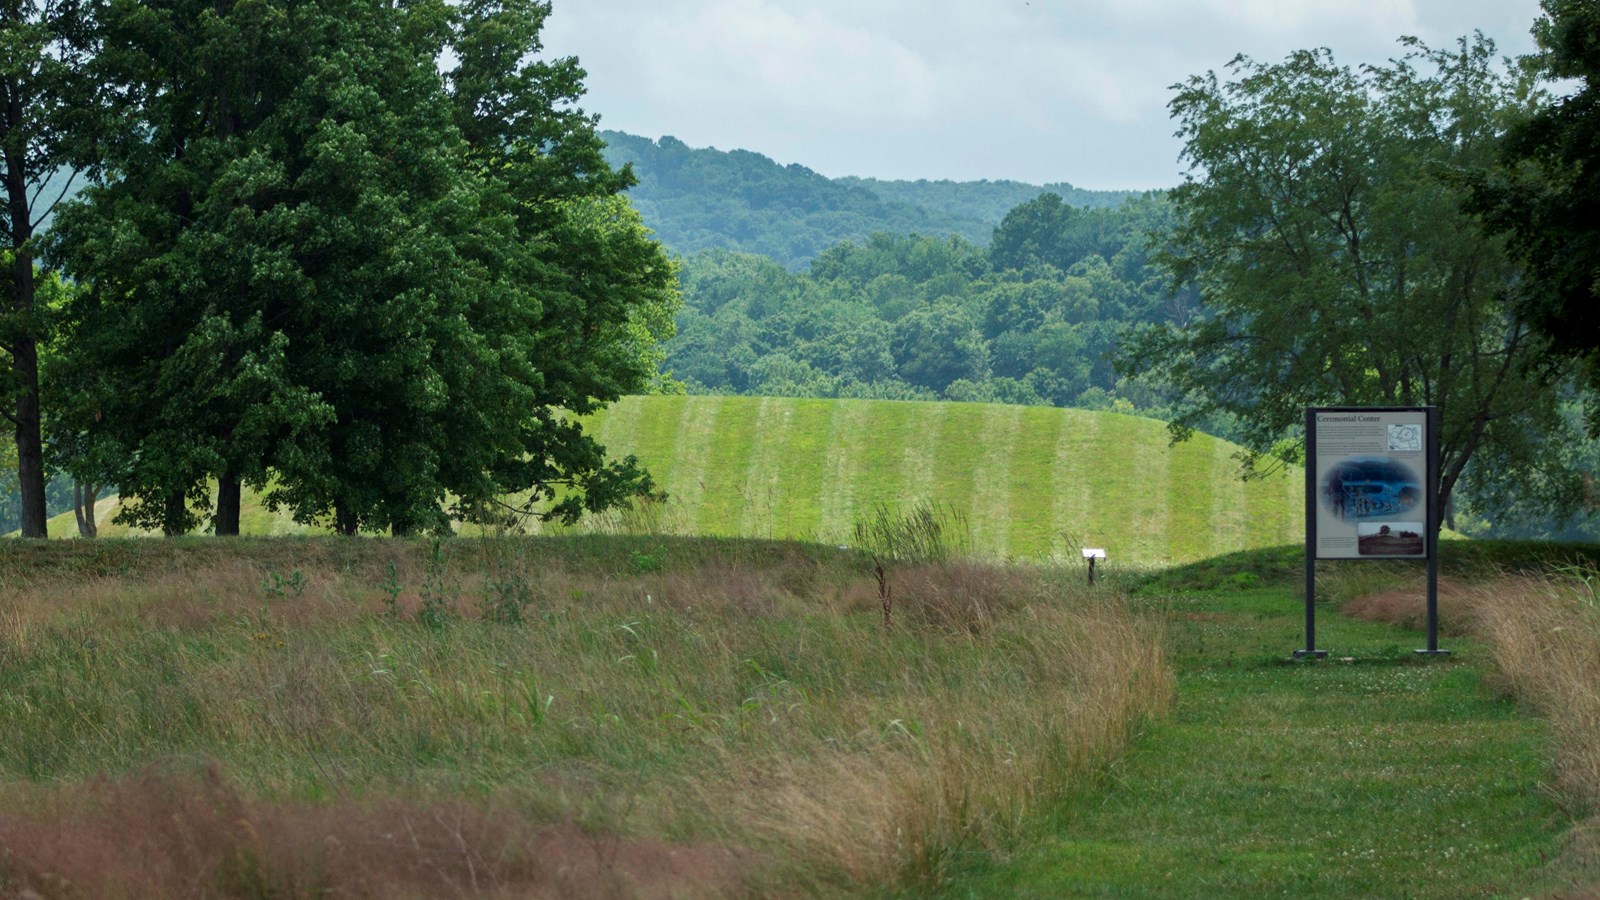 A mowed grass trail leads to a large grass-covered mound with back-and-forth mowed grass patterns